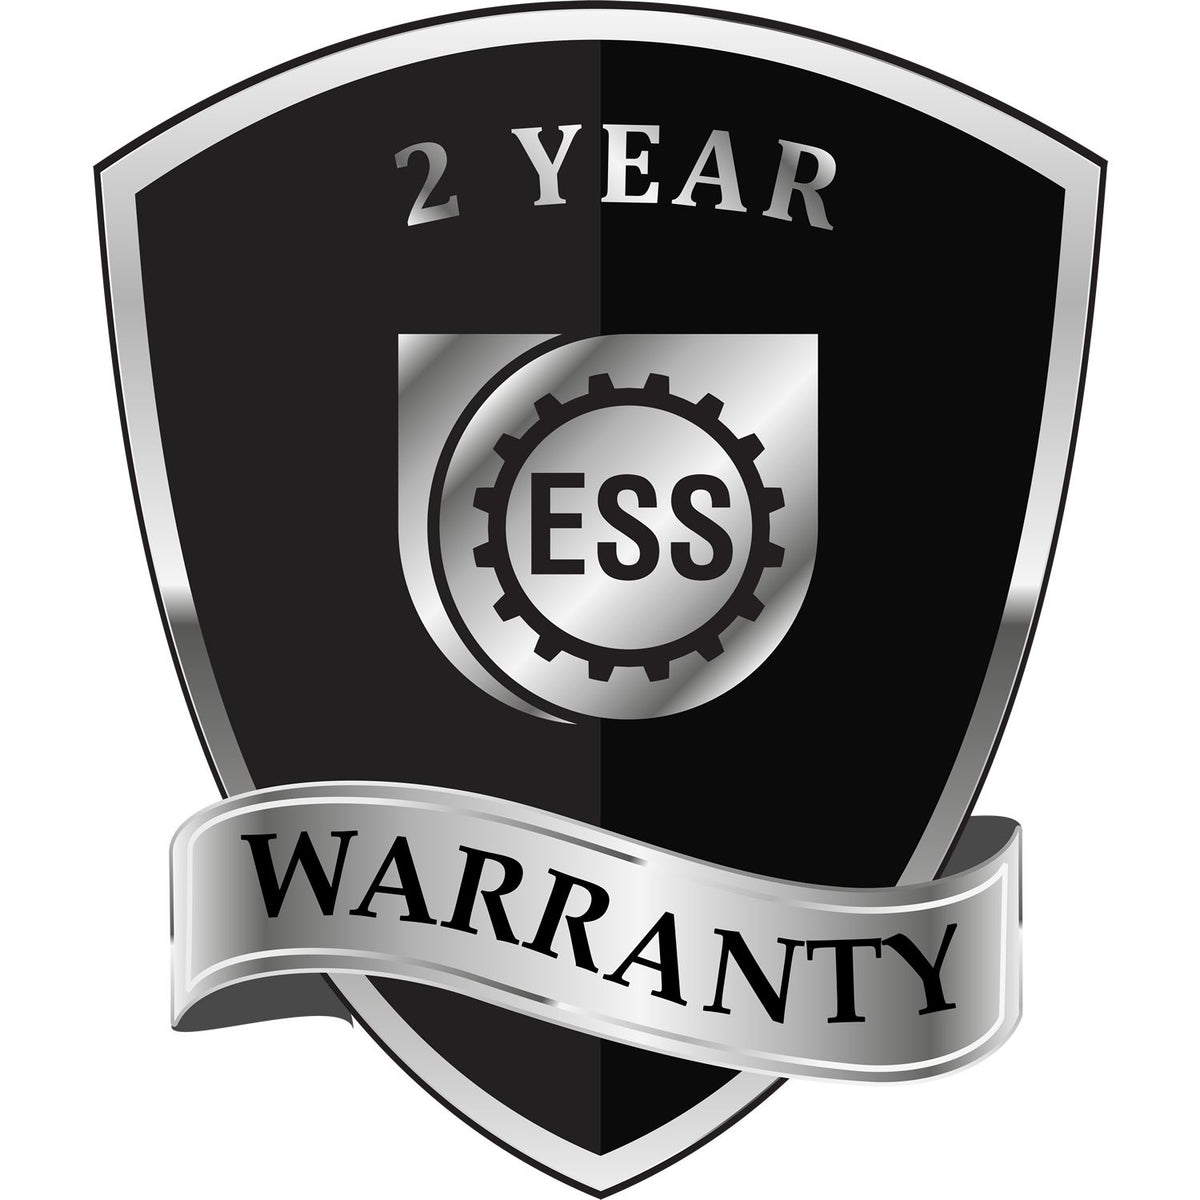 A badge or emblem showing a warranty icon for the Louisiana Engineer Desk Seal